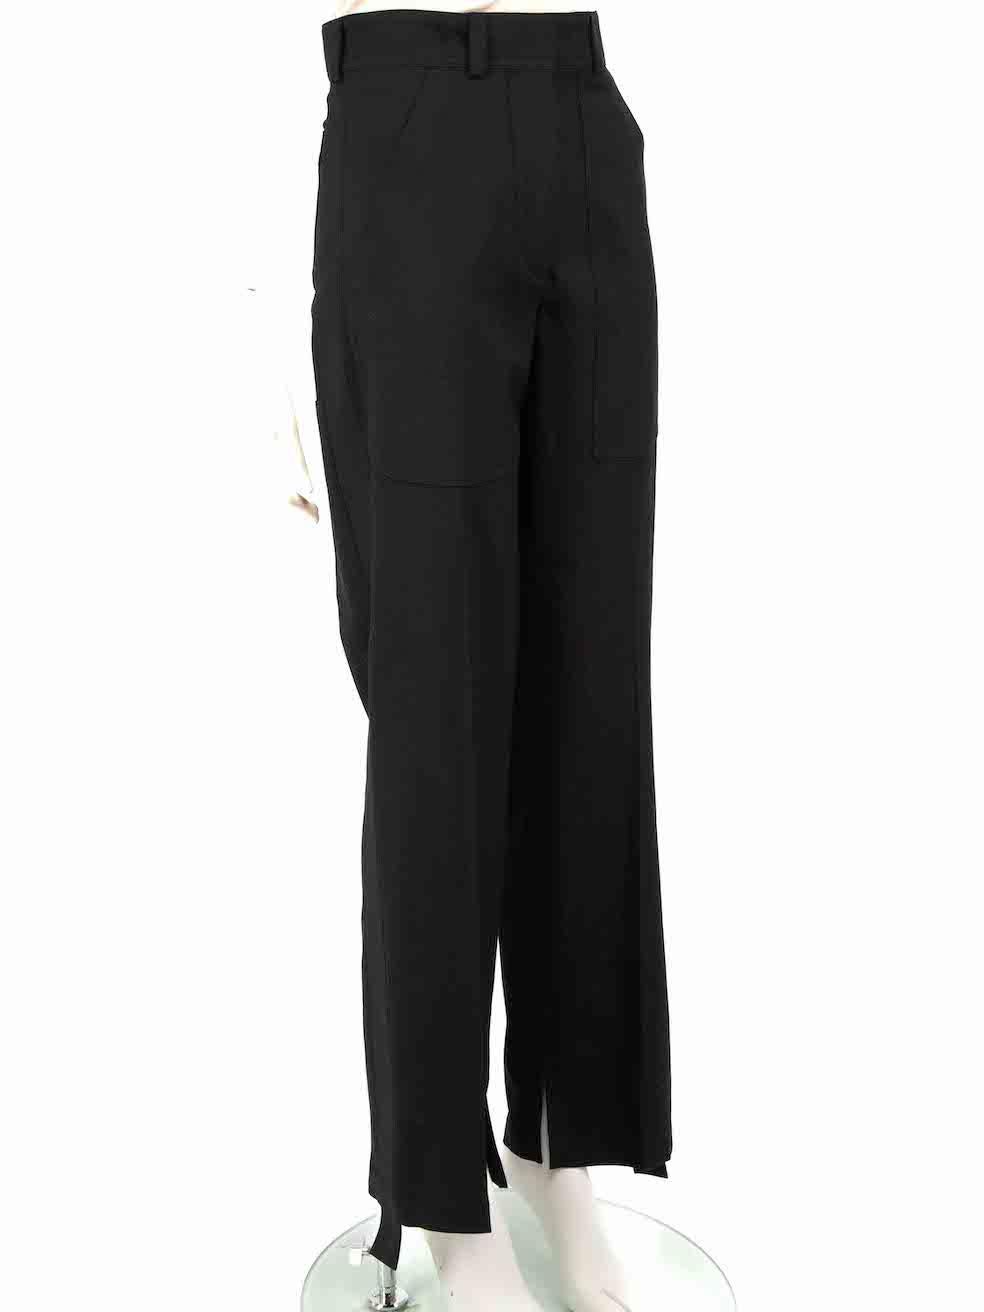 CONDITION is Never worn, with tags. No visible wear to trousers is evident on this new Stella McCartney designer resale item.
 
 
 
 Details
 
 
 Black
 
 Wool
 
 Trousers
 
 Straight leg
 
 Mid rise
 
 2x Side pockets
 
 1x Back pocket
 
 Fly zip,